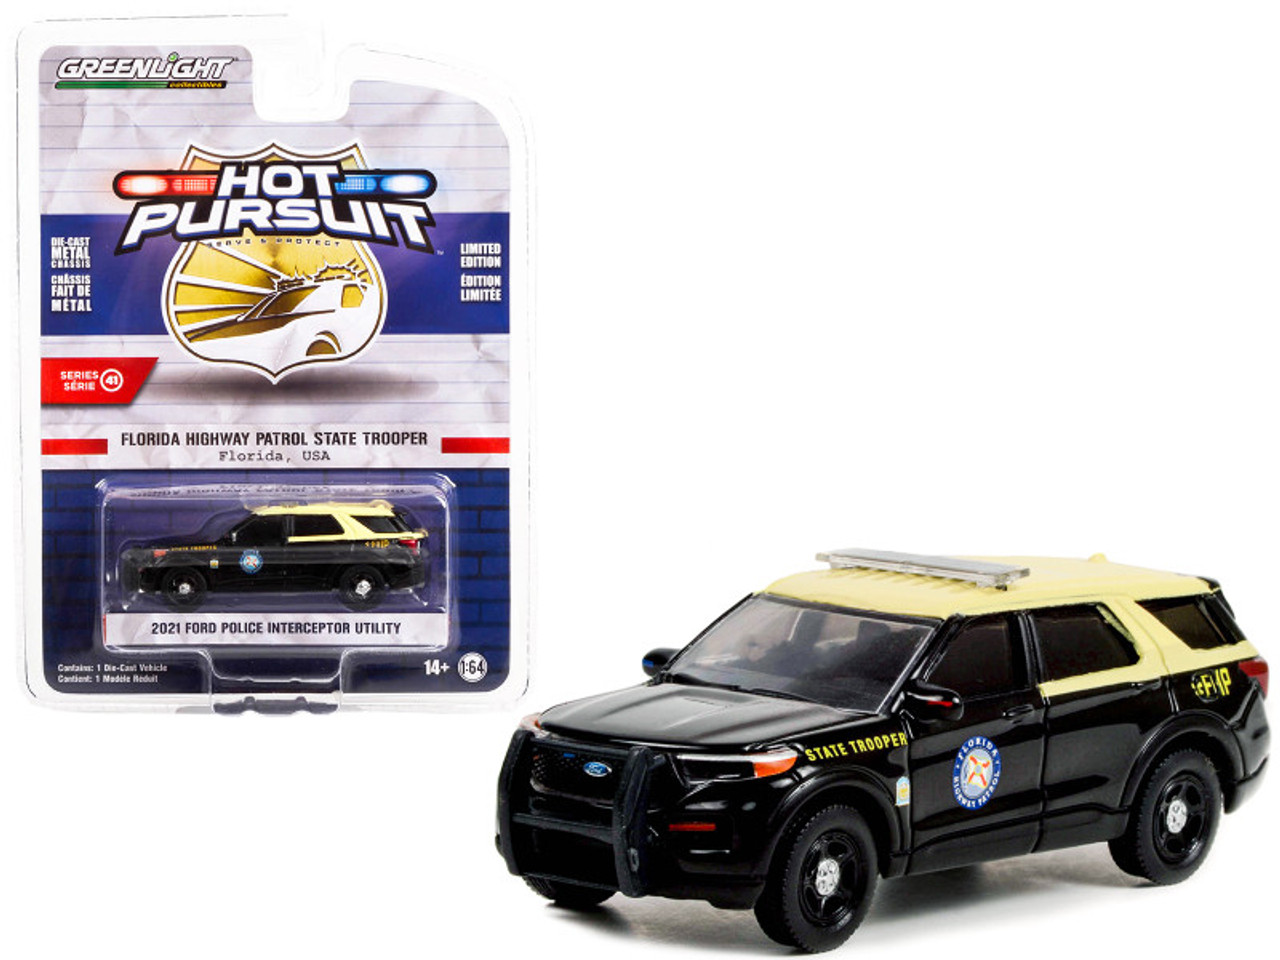 2021 Ford Police Interceptor Utility Black with Cream Top "Florida Highway Patrol State Trooper" "Hot Pursuit" Series 41 1/64 Diecast Model Car by Greenlight